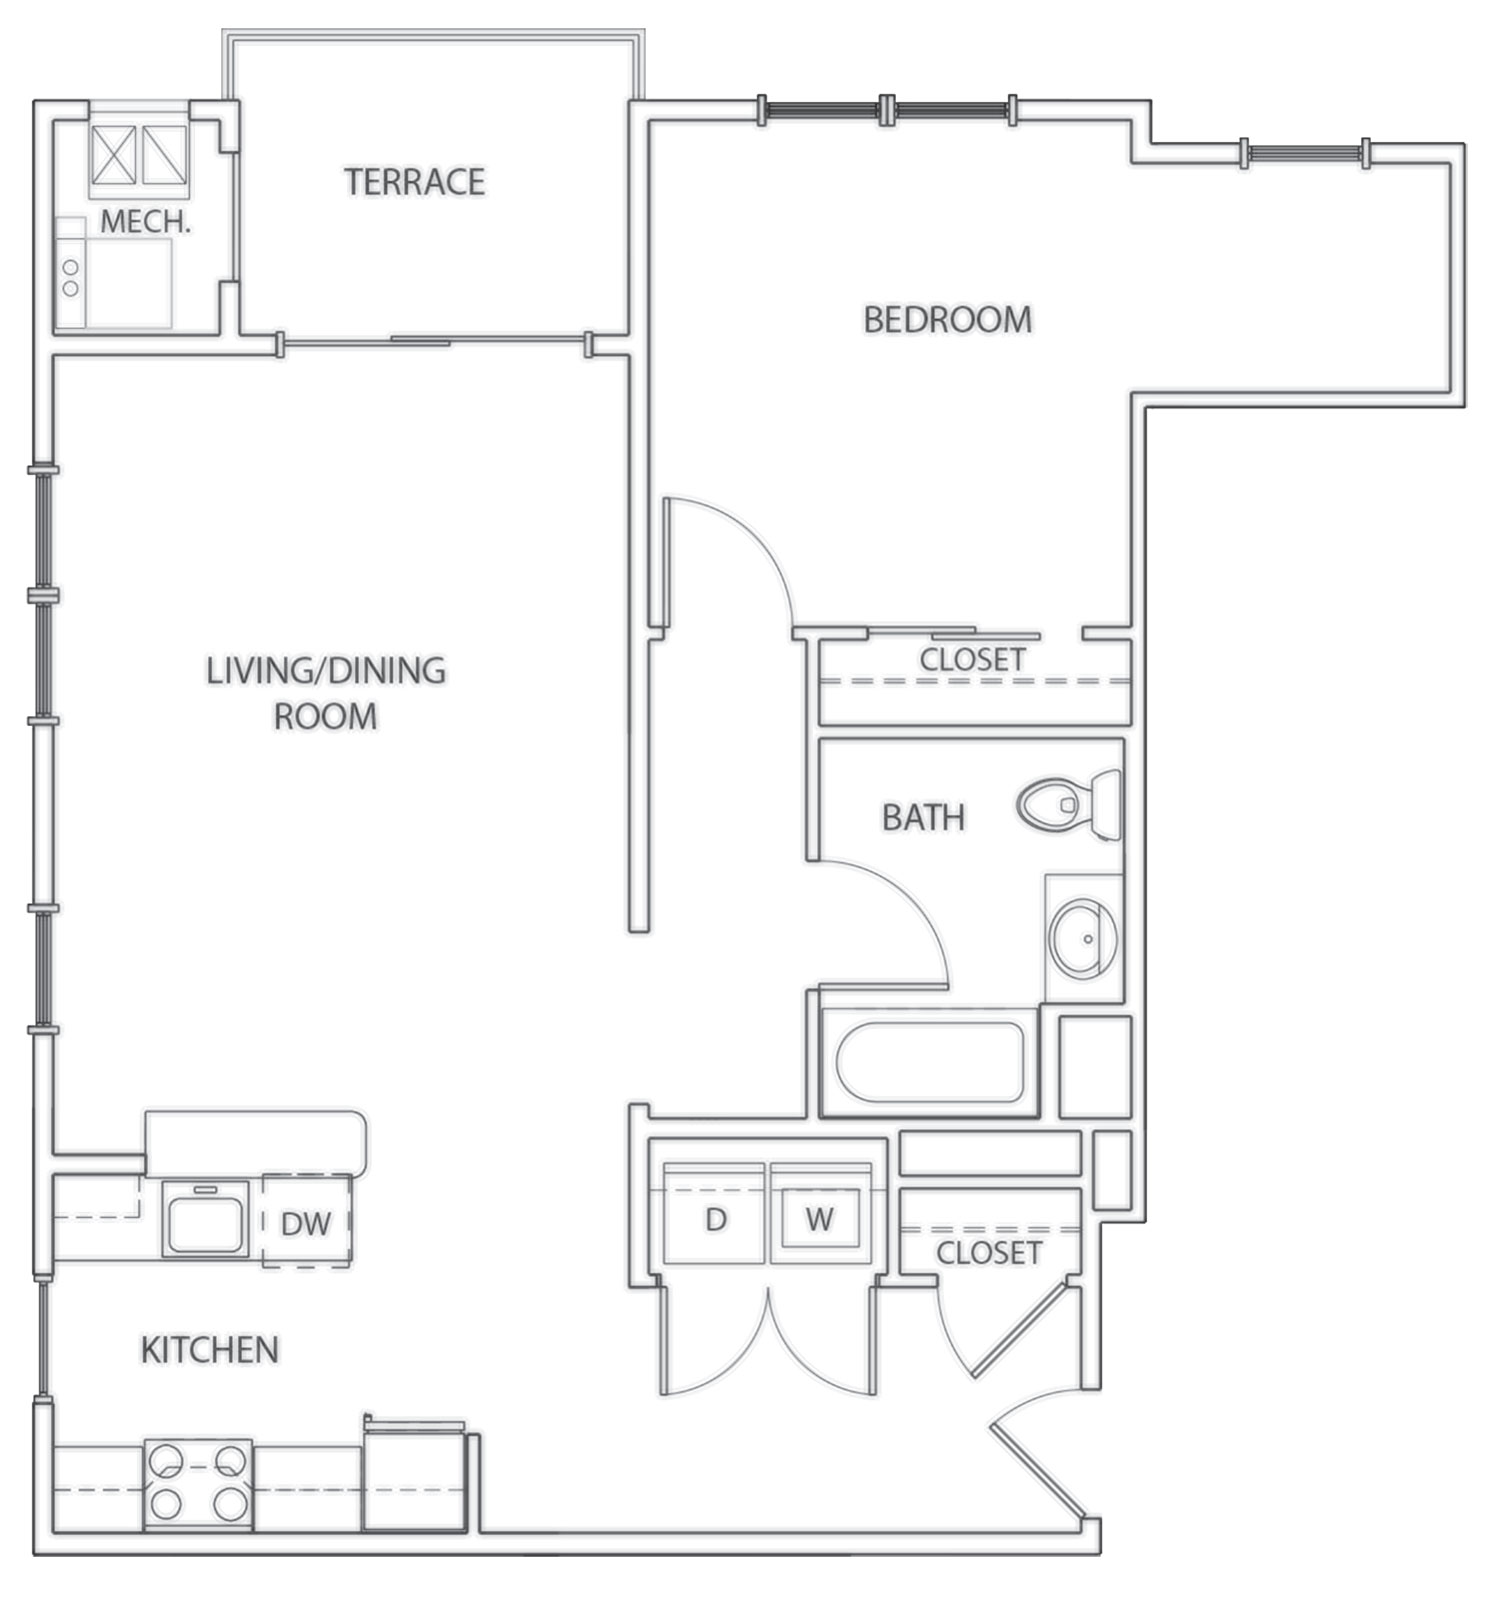 One bedroom apartment floor plan with office space in Secaucus